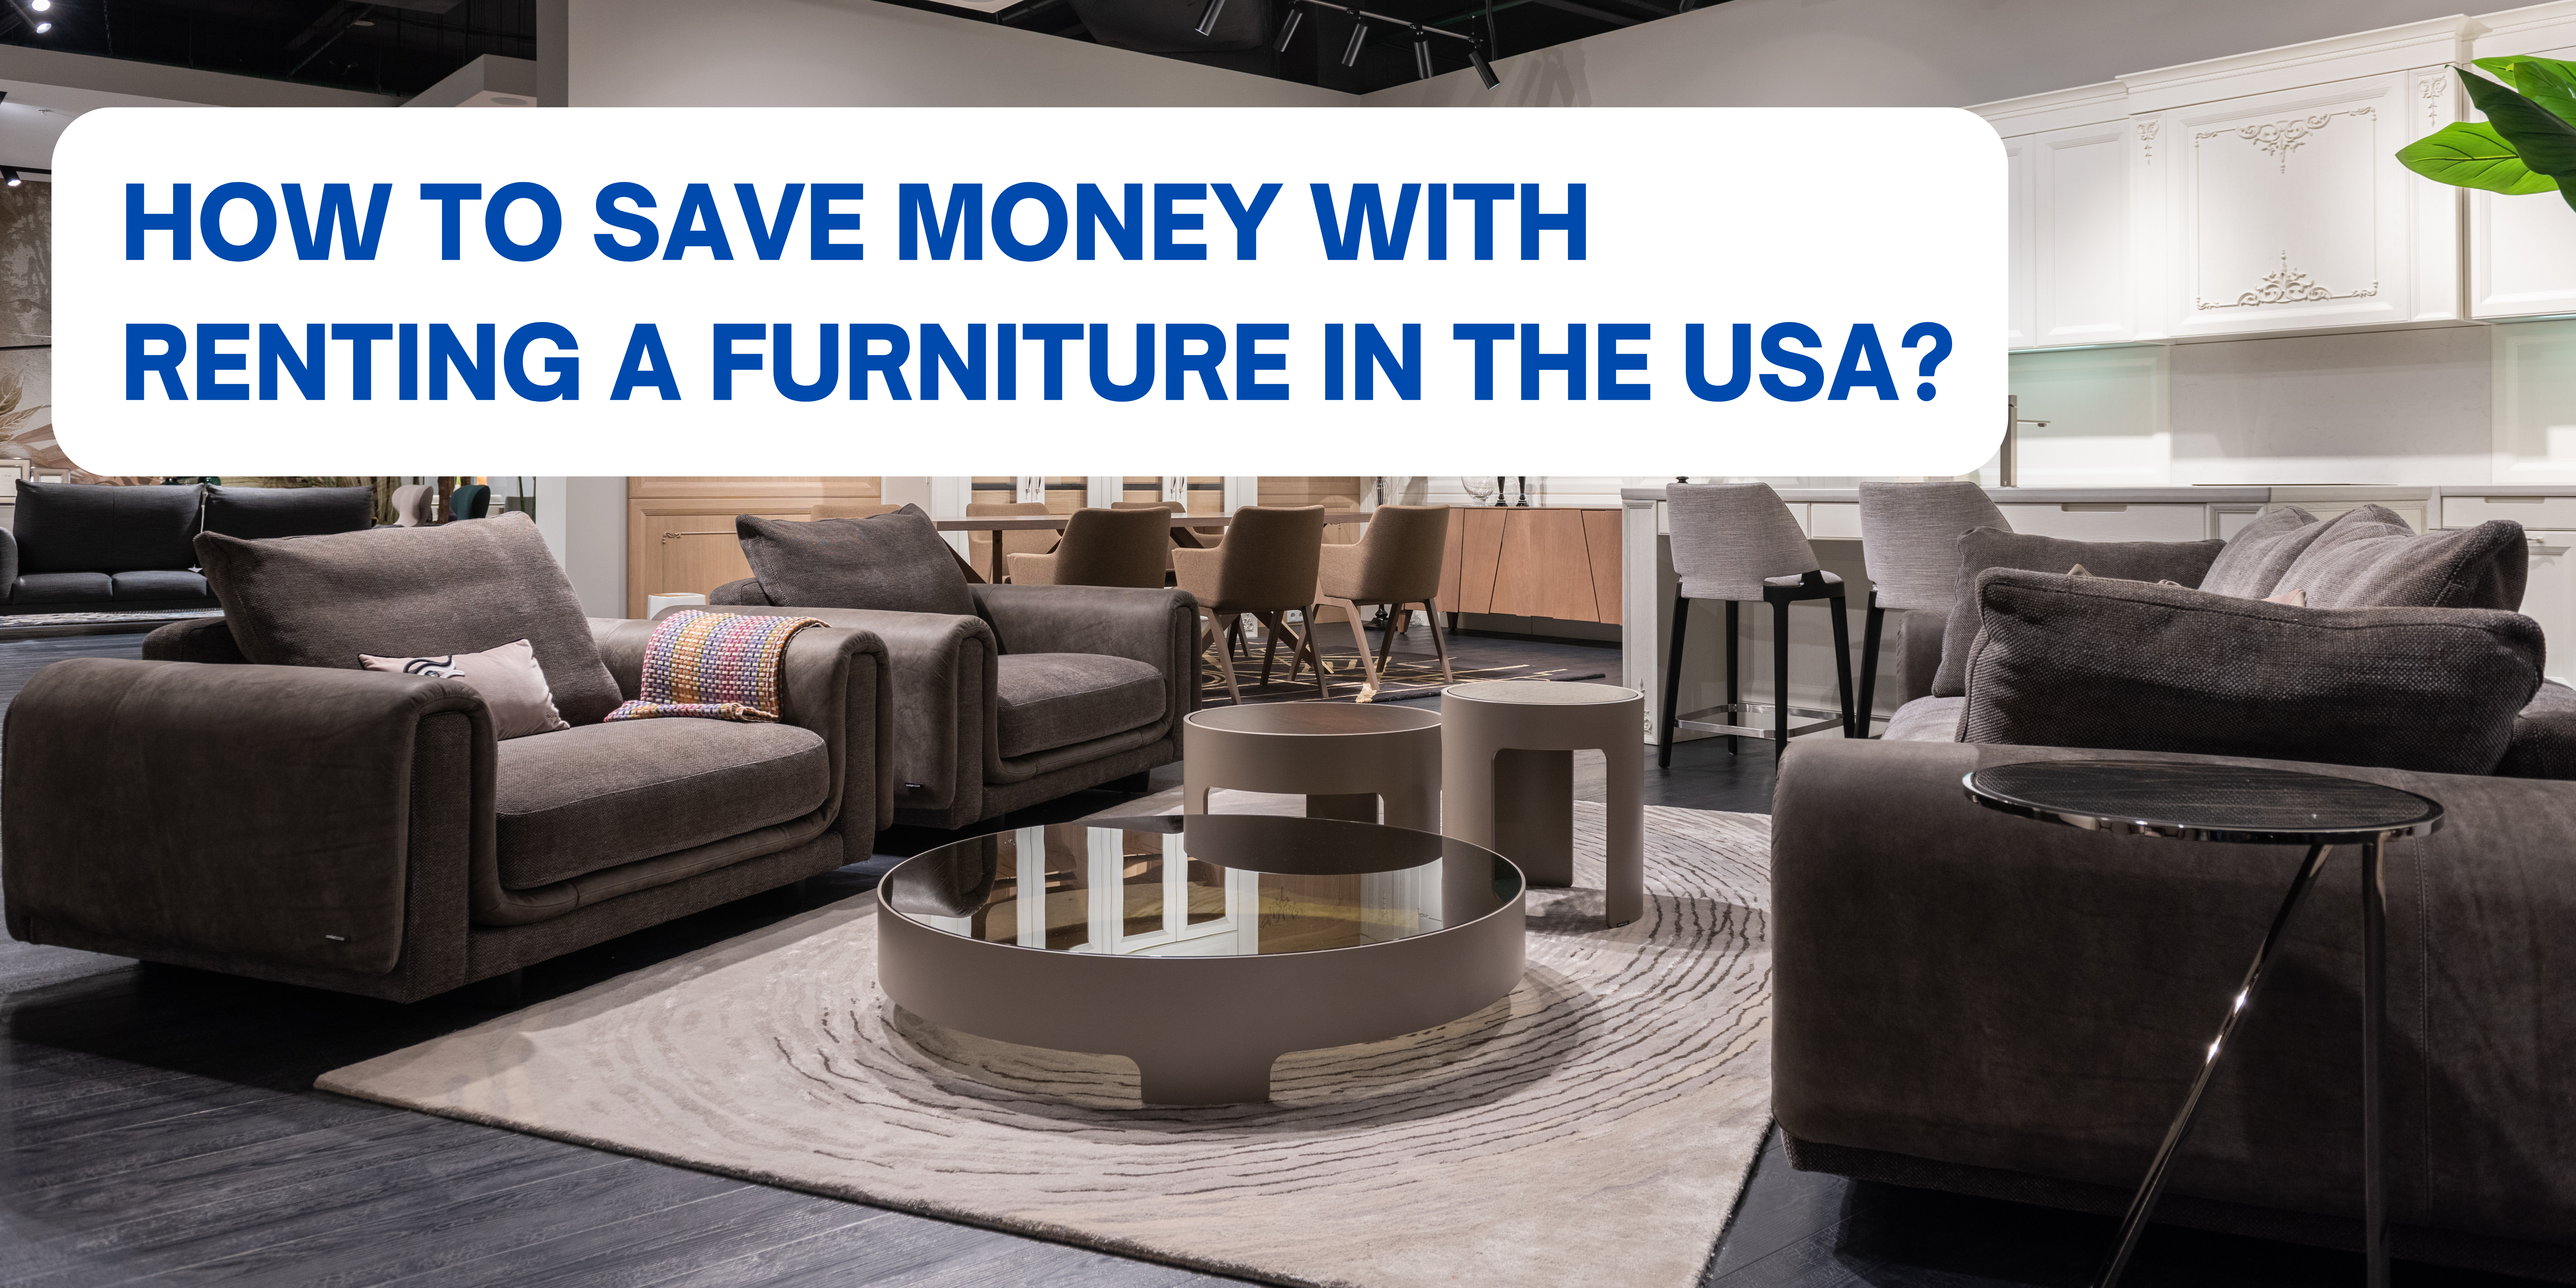 How to Save Money with renting furniture in USA